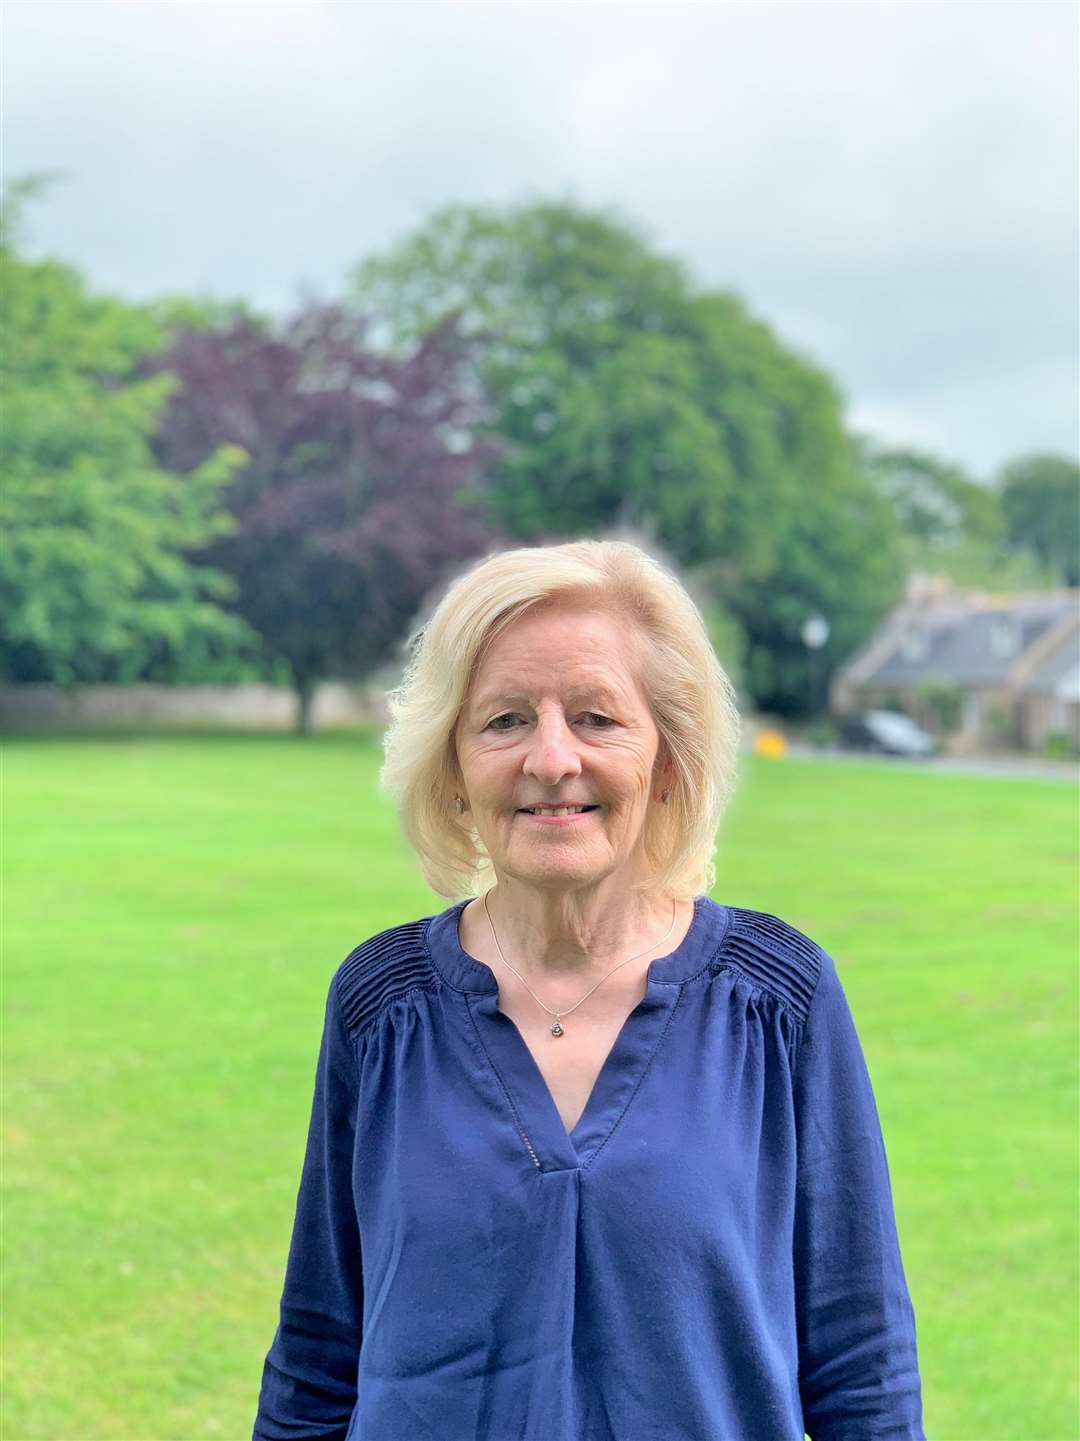 Scottish Conservatives candidate for the Mid Formartine by-election Sheila Powell.